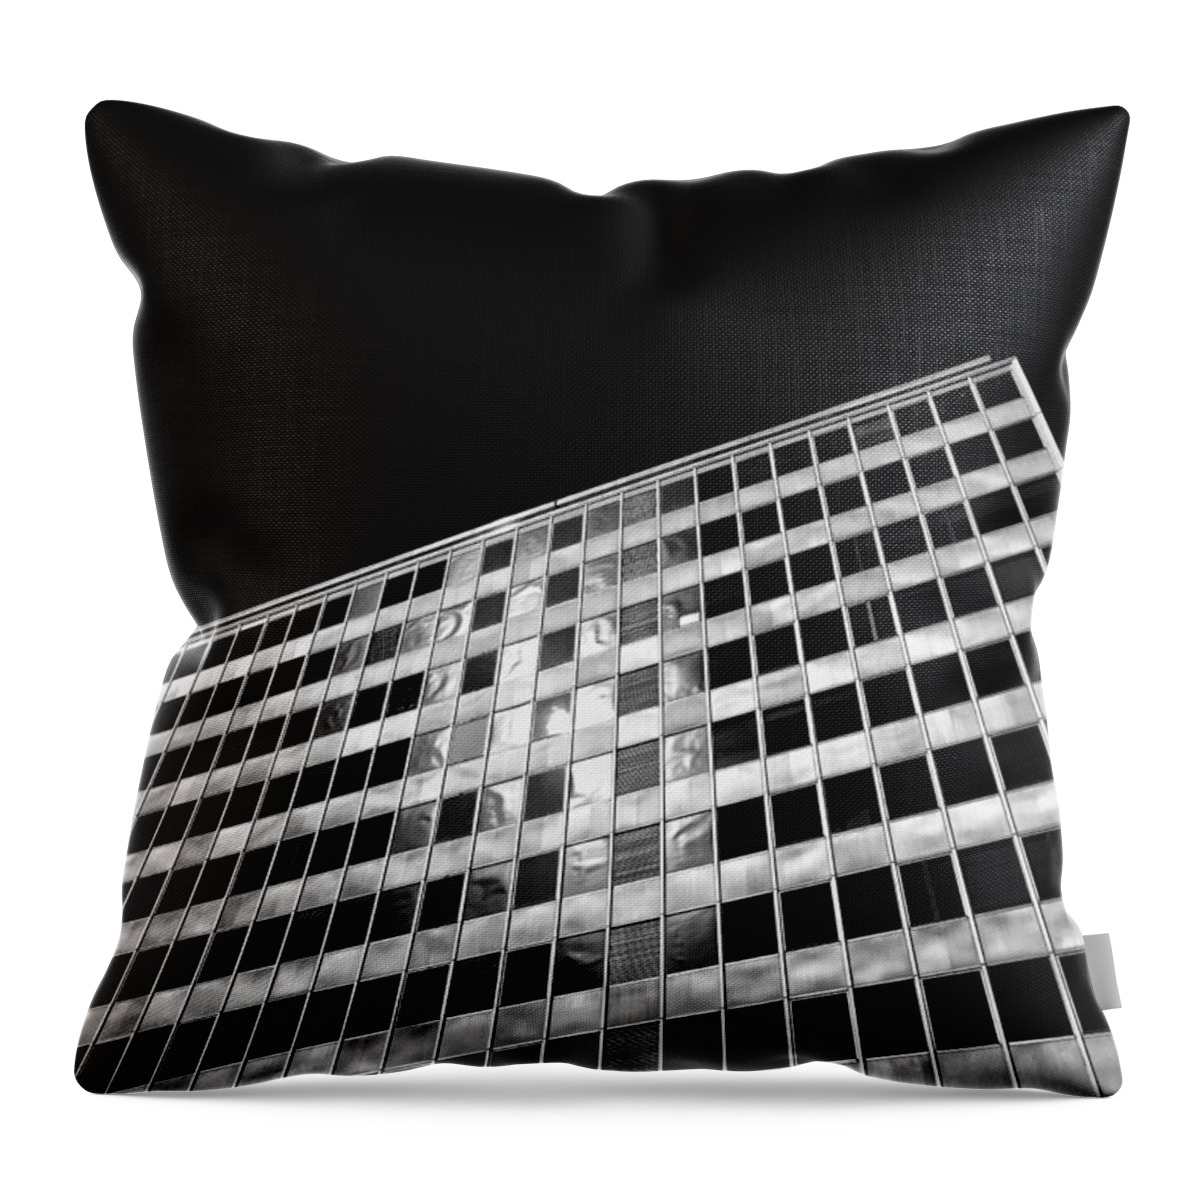 Architecture Throw Pillow featuring the photograph International Noir I by Mark David Gerson